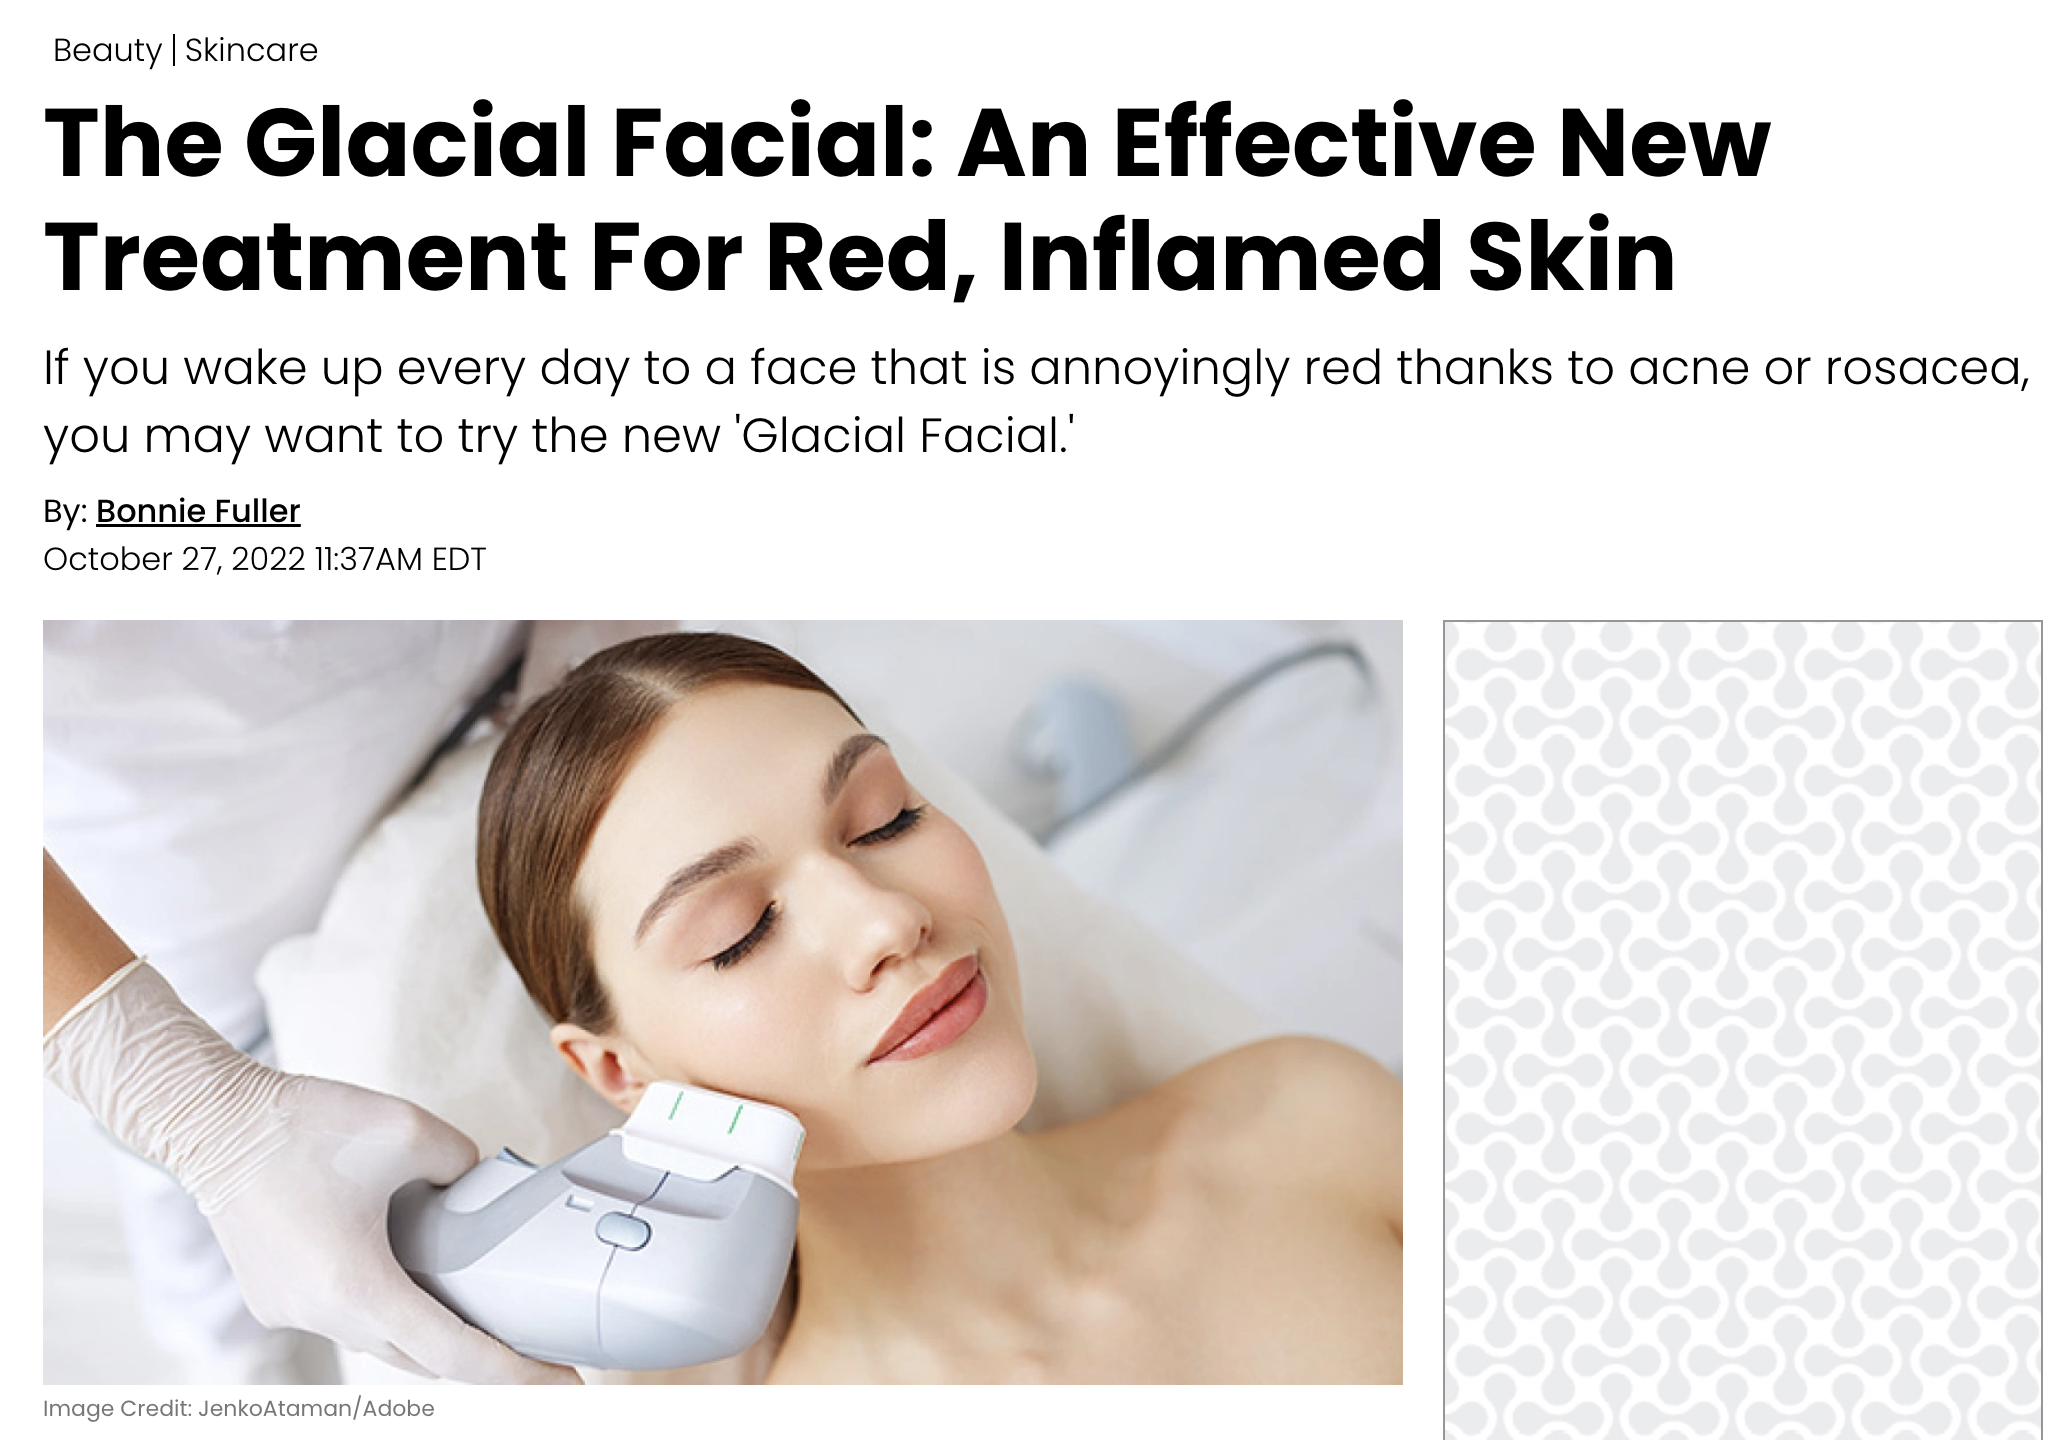 JUVA Skin & Laser Center Blog | Dr. Bruce Katz was featured in a Hollywood Life article entitled 